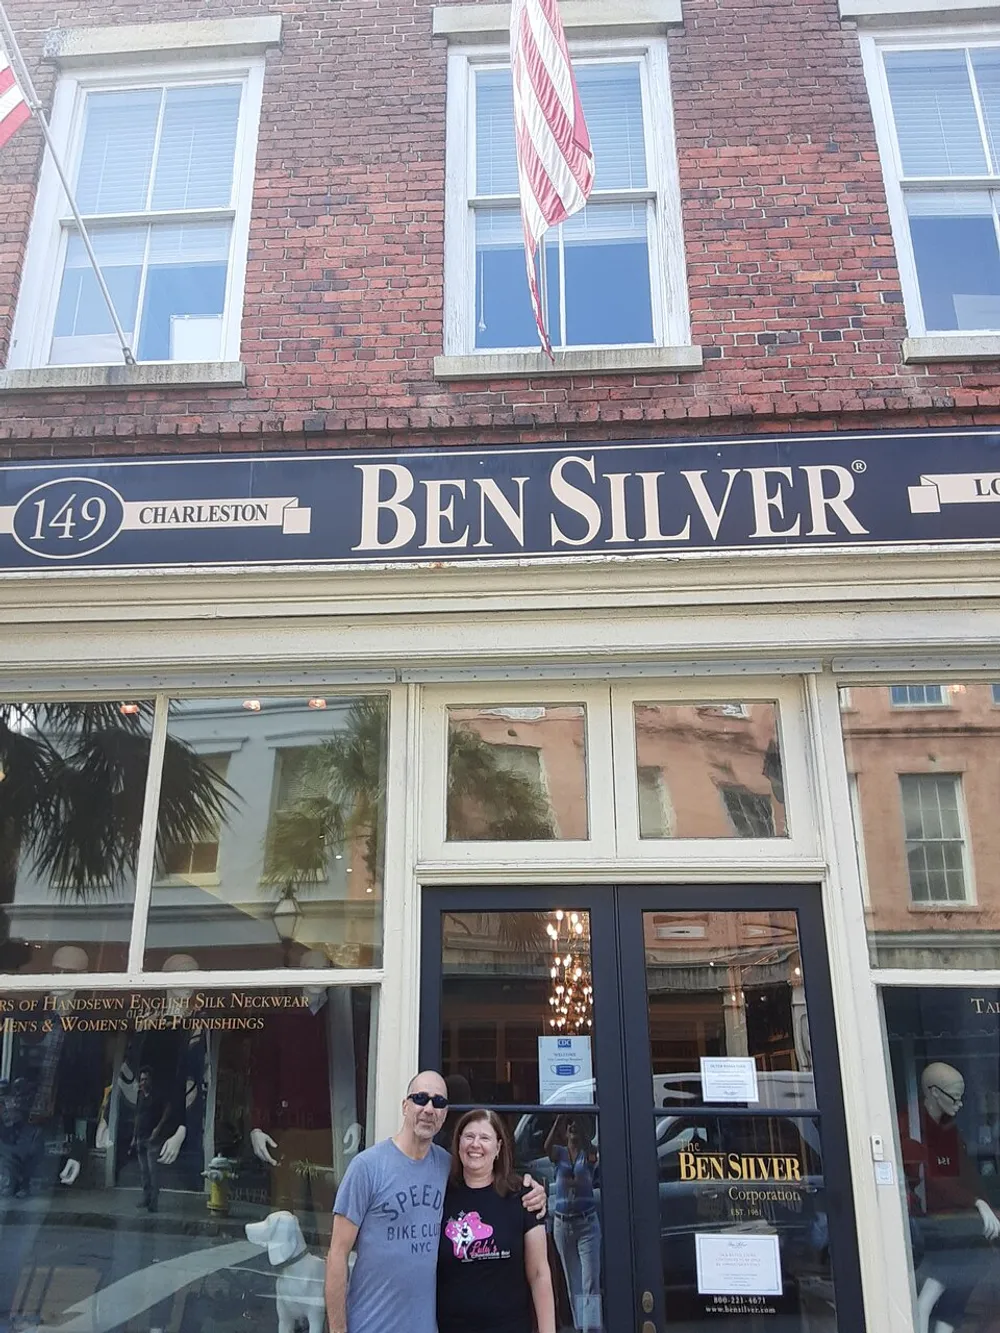 A man and a woman stand smiling in front of the Ben Silver storefront on a sunny day with American flags hanging above them